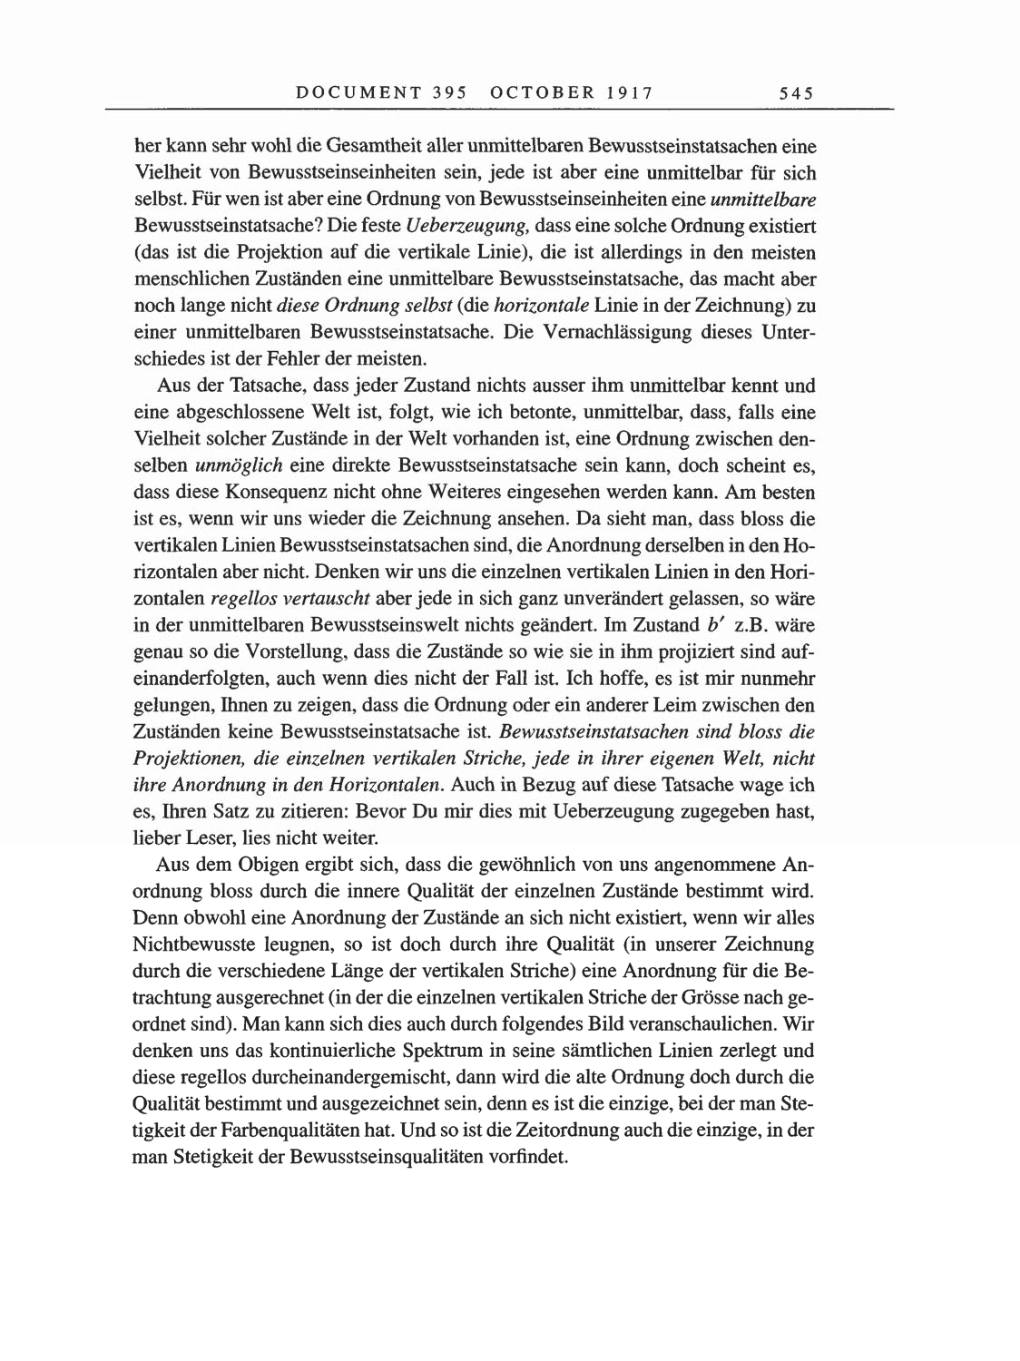 Volume 8, Part A: The Berlin Years: Correspondence 1914-1917 page 545